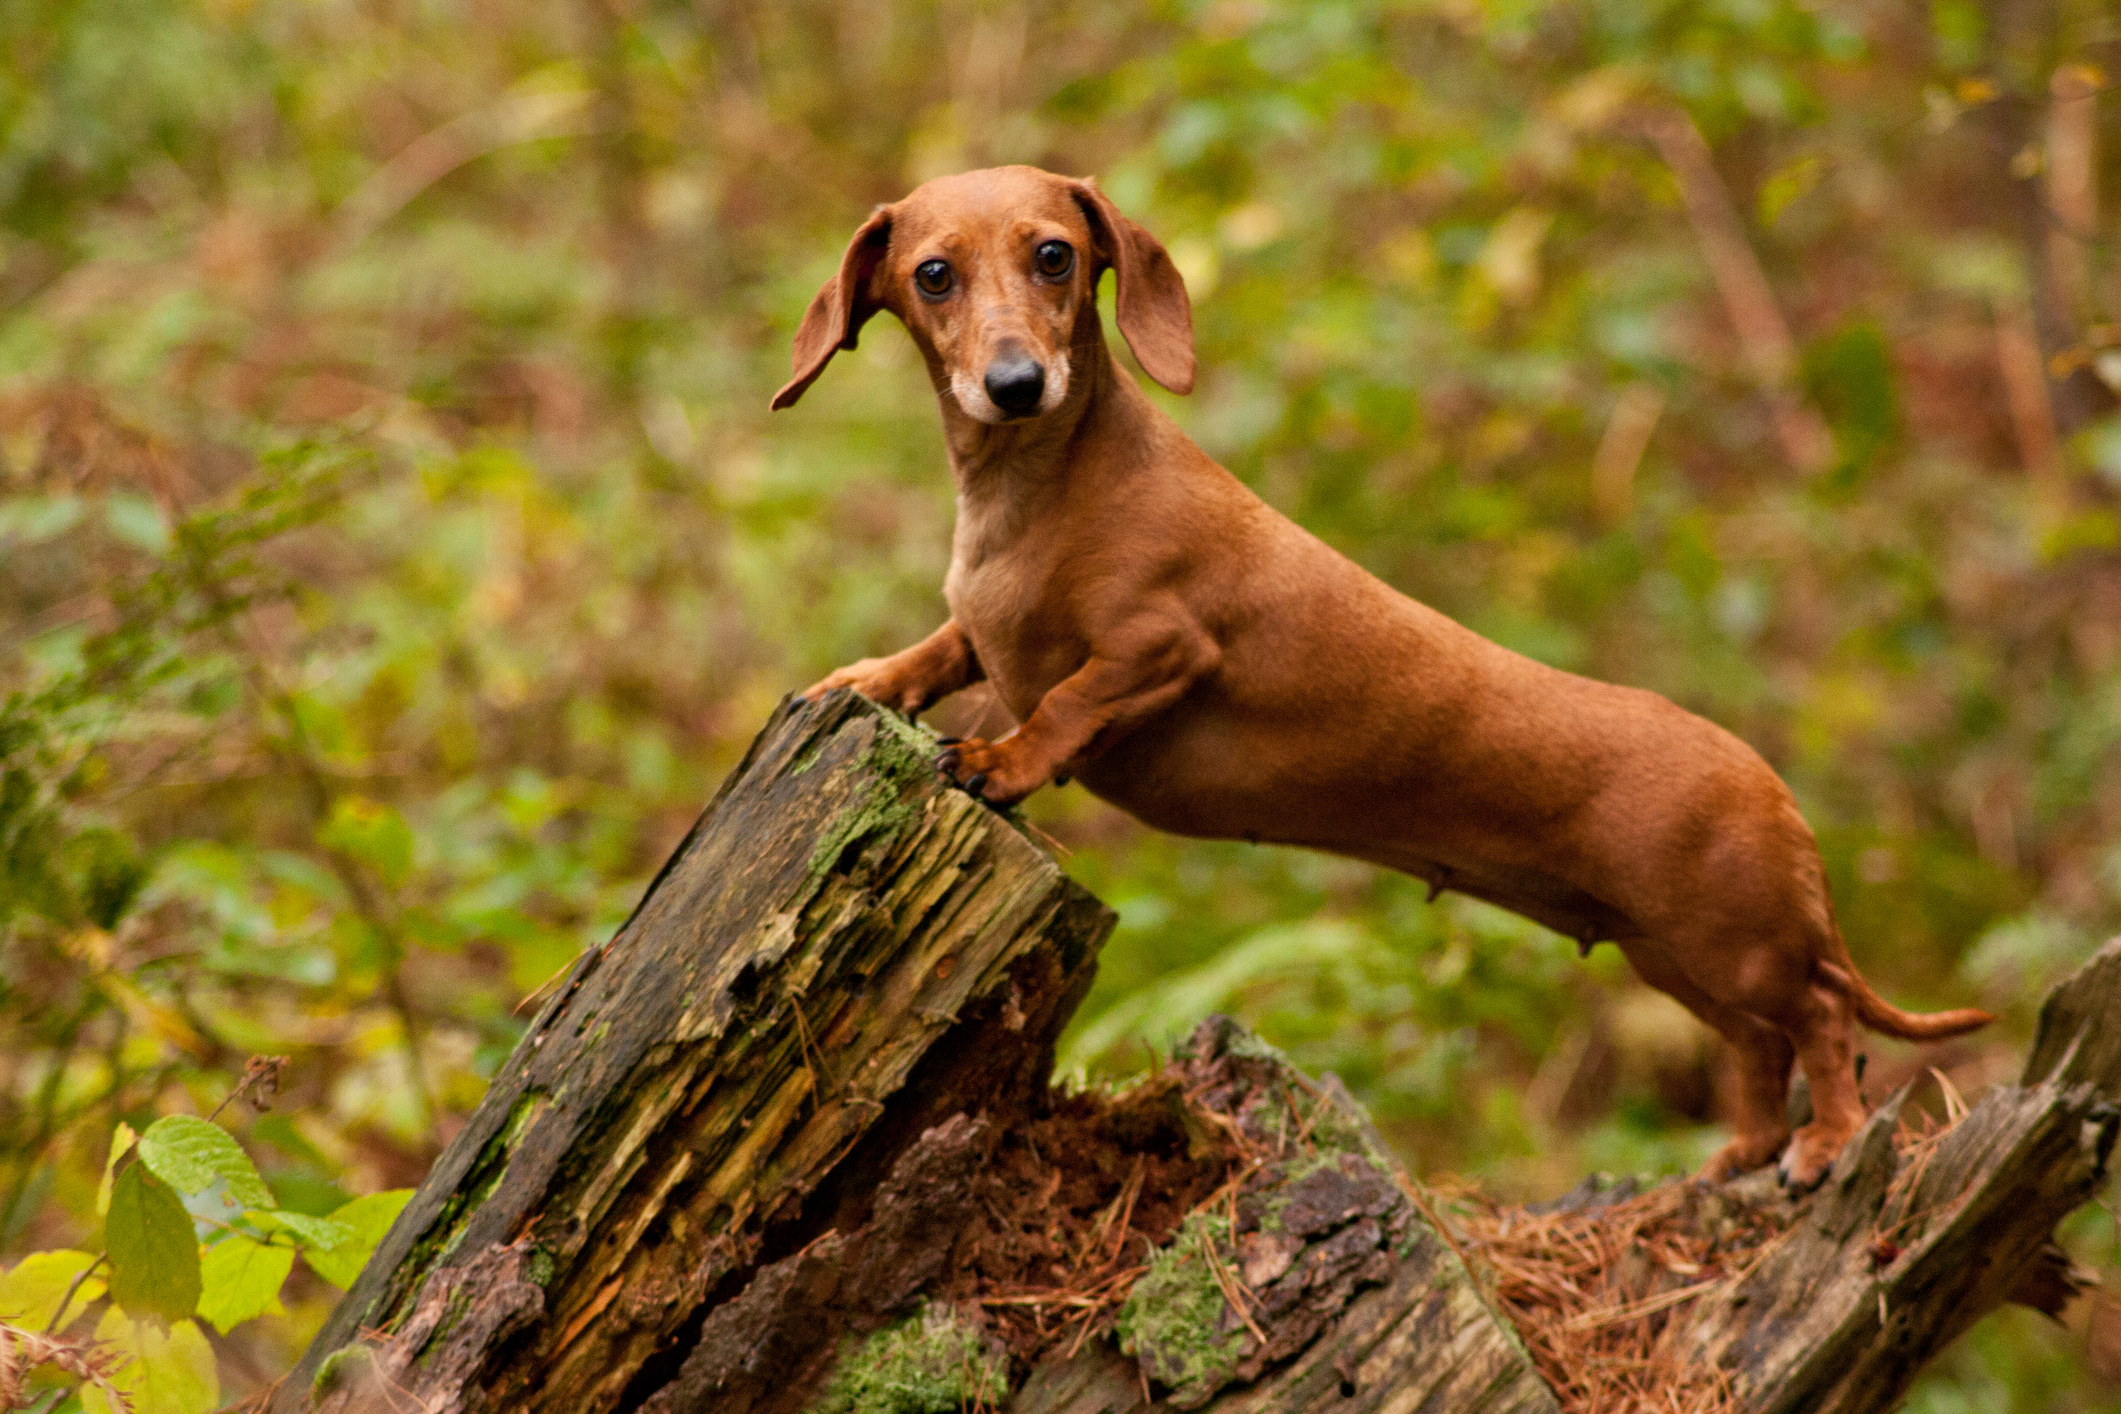 A sausage dog standing on a log in a woodland area